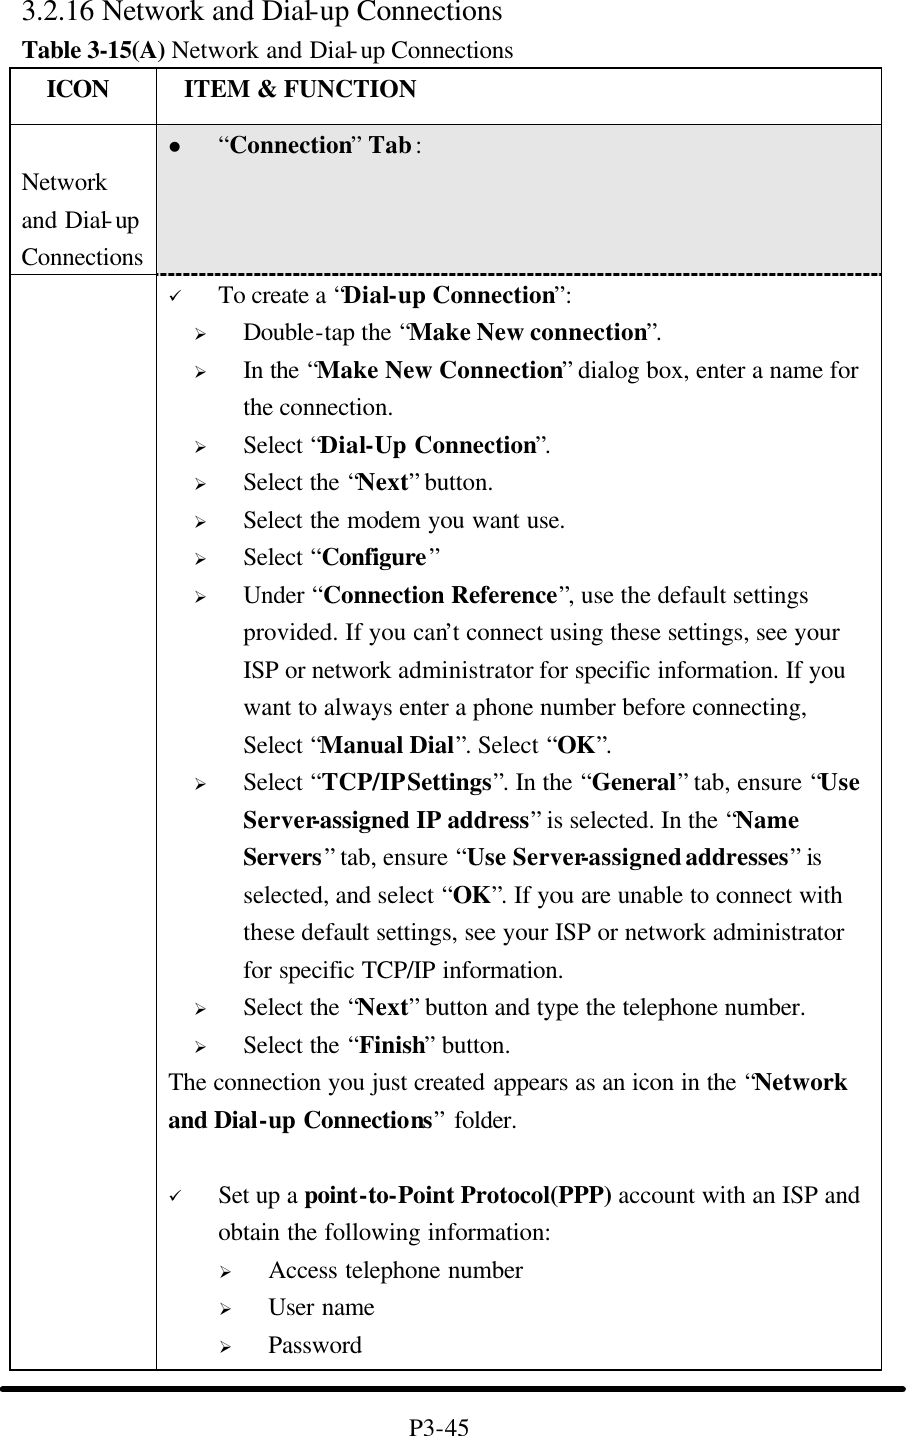 3.2.16 Network and Dial-up Connections Table 3-15(A) Network and Dial-up Connections   ICON  ITEM &amp; FUNCTION  Network and Dial-up Connections l “Connection” Tab :    ü To create a “Dial-up Connection”: Ø Double-tap the “Make New connection”. Ø In the “Make New Connection” dialog box, enter a name for the connection. Ø Select “Dial-Up Connection”. Ø Select the “Next” button. Ø Select the modem you want use. Ø Select “Configure” Ø Under “Connection Reference”, use the default settings provided. If you can’t connect using these settings, see your ISP or network administrator for specific information. If you want to always enter a phone number before connecting, Select “Manual Dial”. Select “OK”. Ø Select “TCP/IP Settings”. In the “General” tab, ensure “Use Server-assigned IP address” is selected. In the “Name Servers” tab, ensure “Use Server-assigned addresses” is selected, and select “OK”. If you are unable to connect with these default settings, see your ISP or network administrator for specific TCP/IP information. Ø Select the “Next” button and type the telephone number. Ø Select the “Finish” button. The connection you just created appears as an icon in the “Network and Dial-up Connections” folder.    ü Set up a point-to-Point Protocol(PPP) account with an ISP and obtain the following information: Ø Access telephone number Ø User name Ø Password  P3-45 